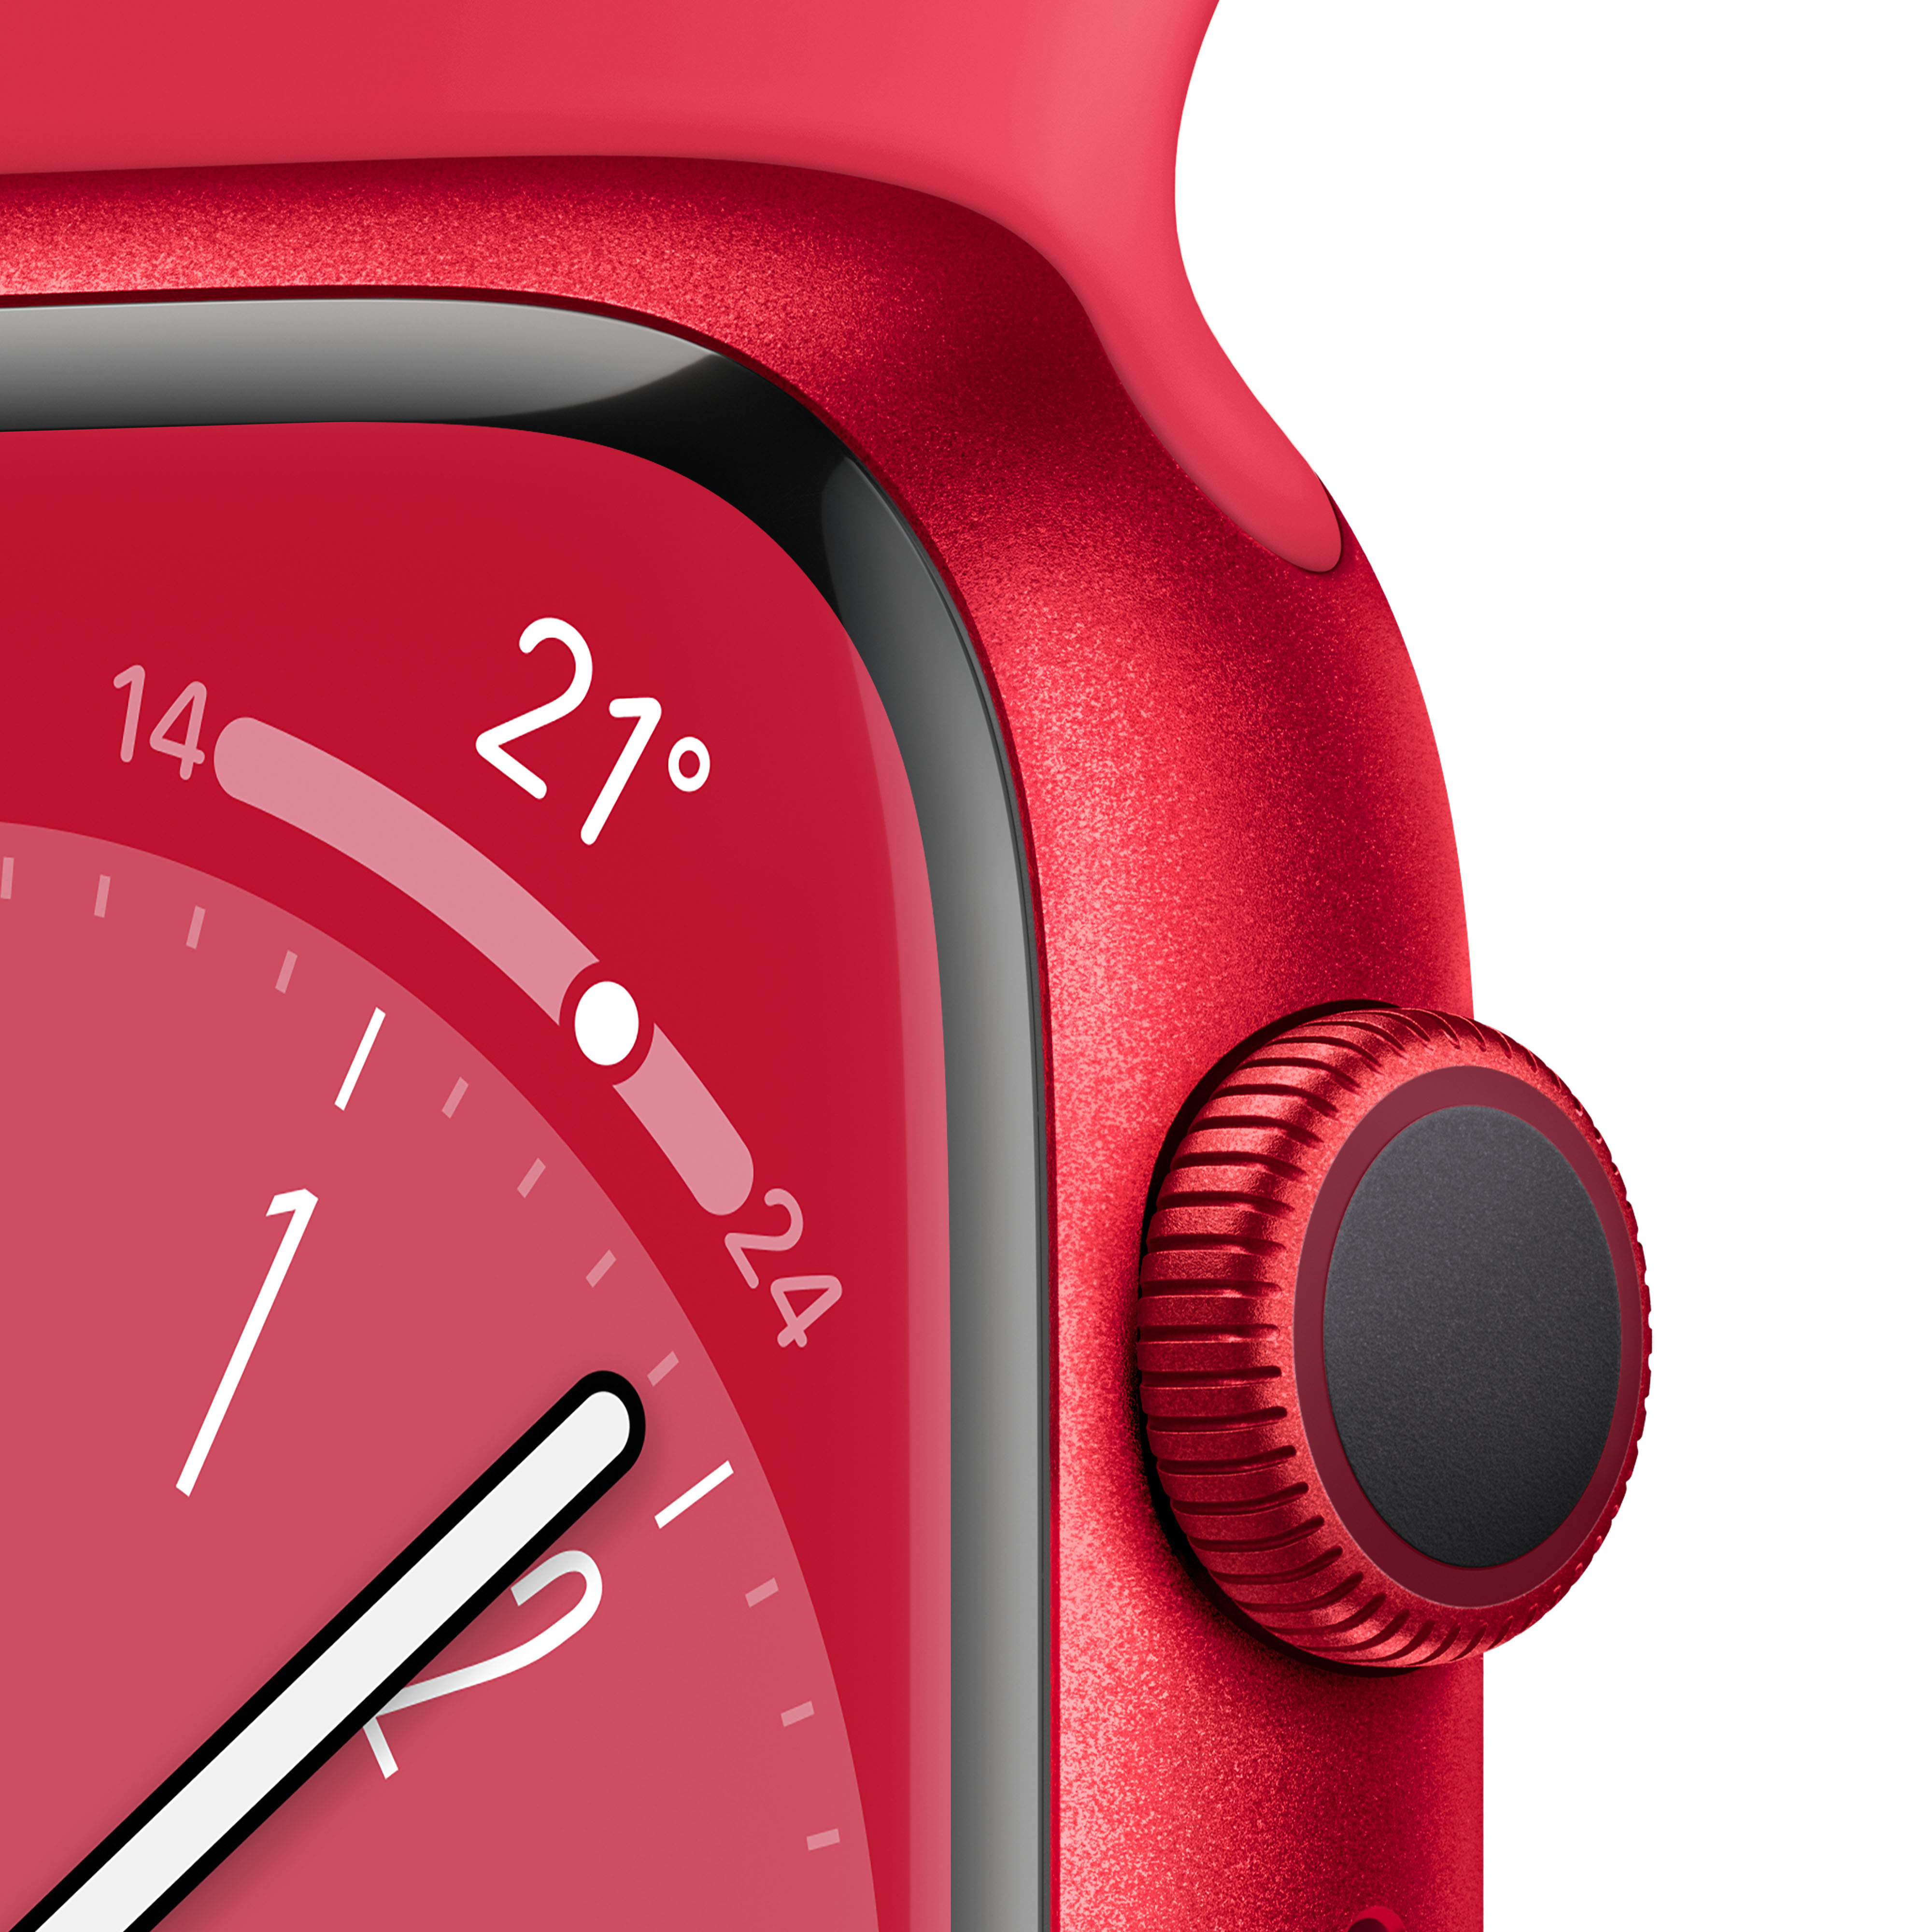 Apple Watch Series 8 (GPS) - (PRODUCT) RED - 45 mm